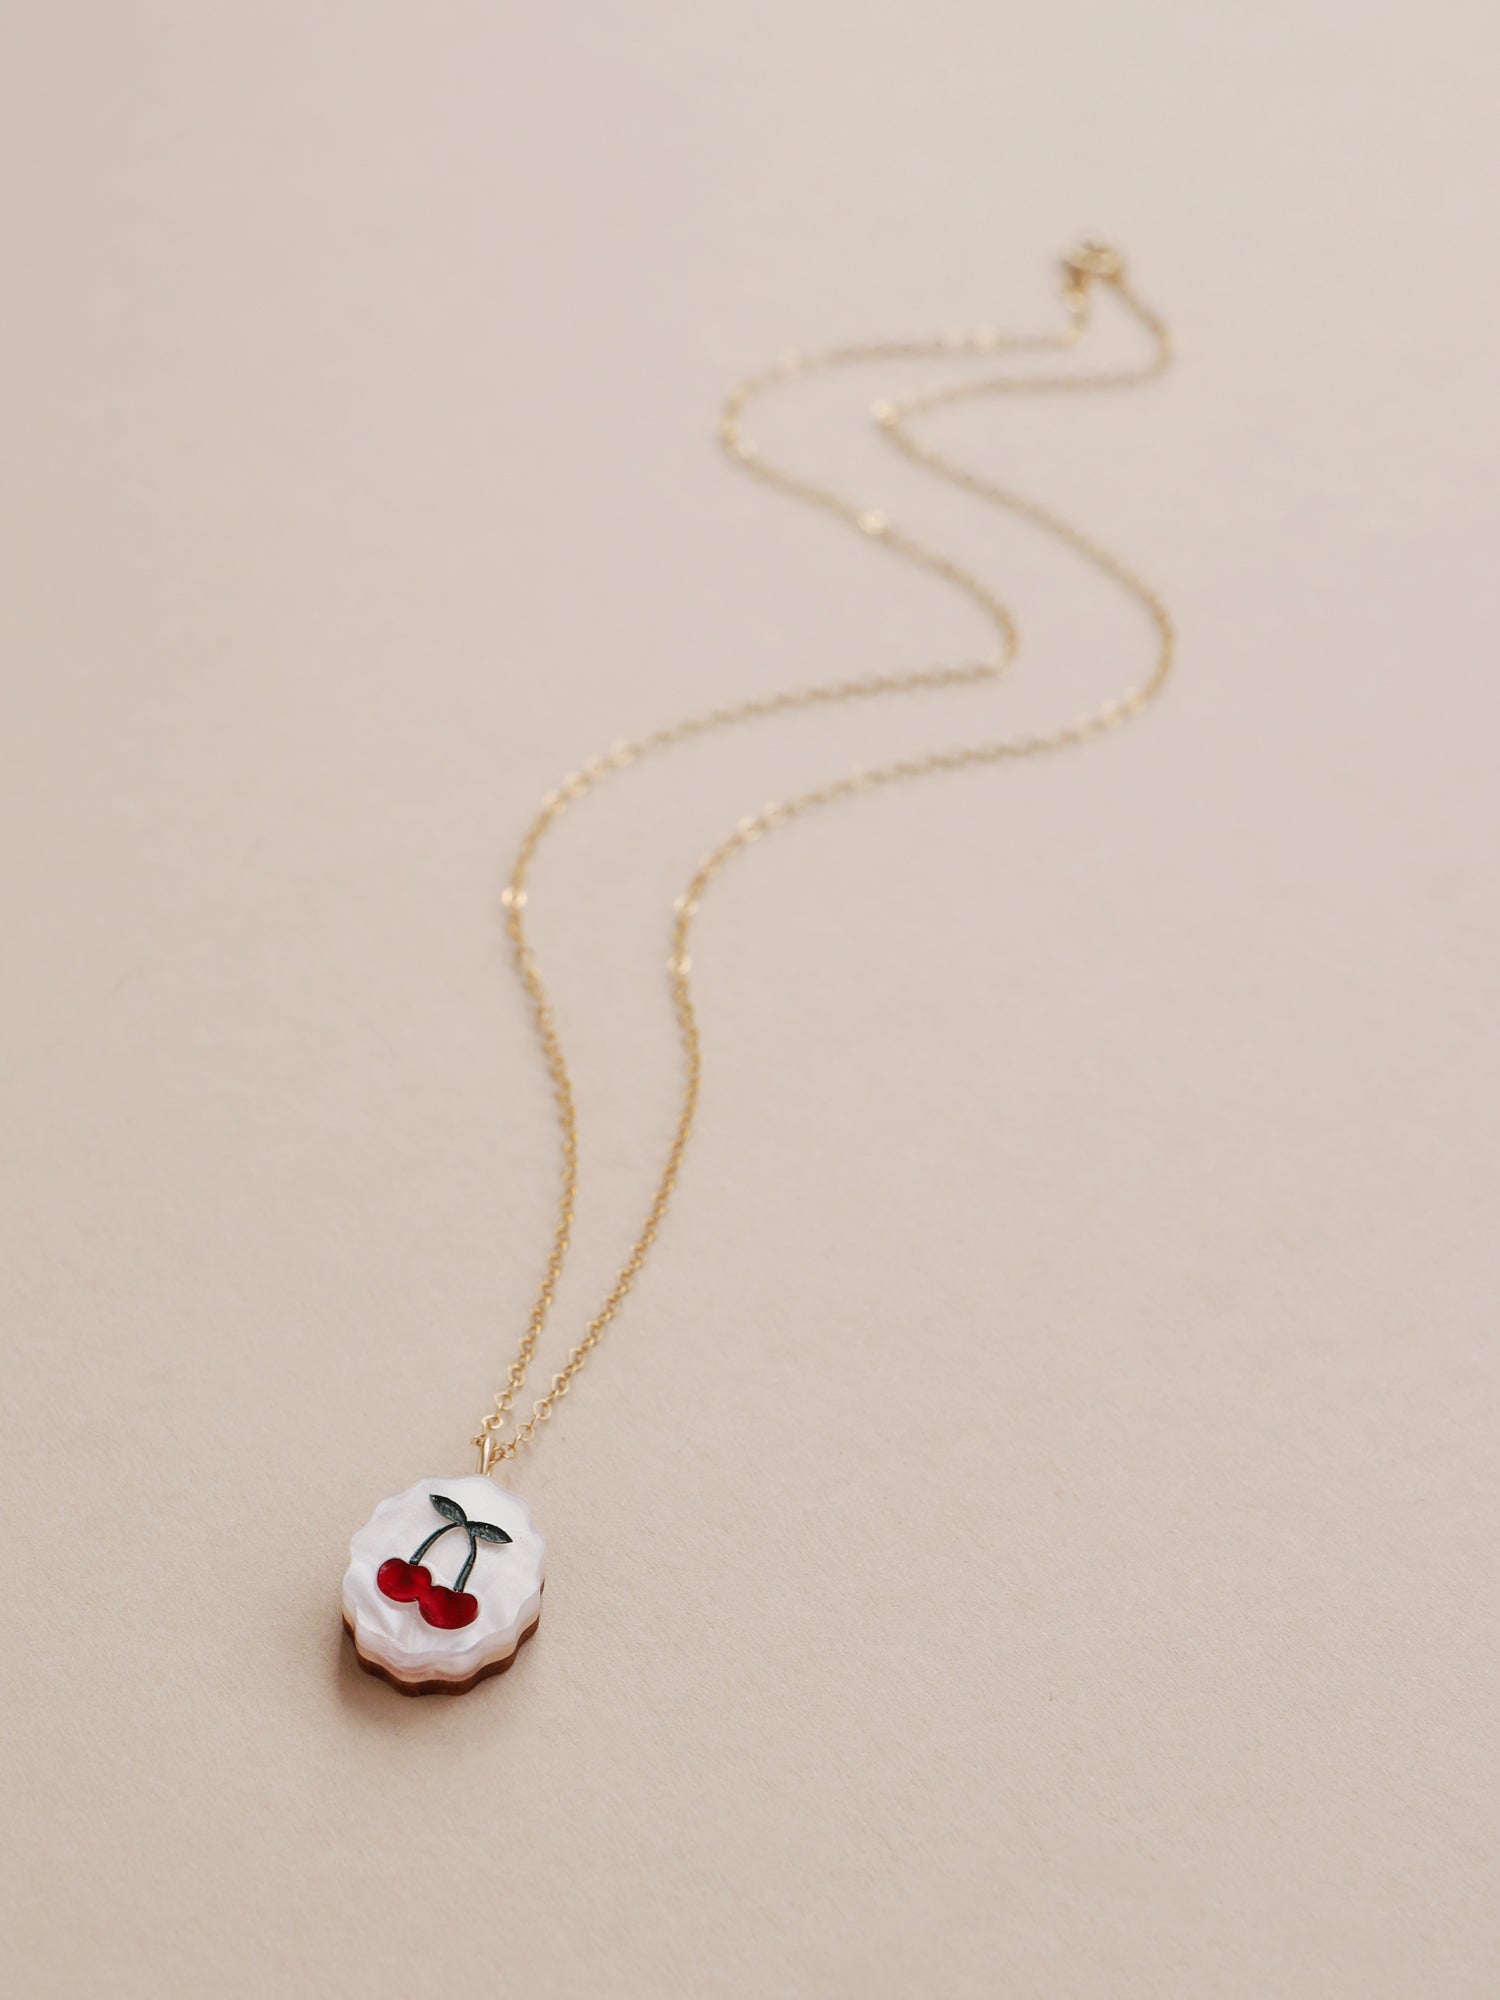 Cherry charm necklace made from acrylic and a 14k gold-filled chain & findings. Handmade in the UK by Wolf & Moon